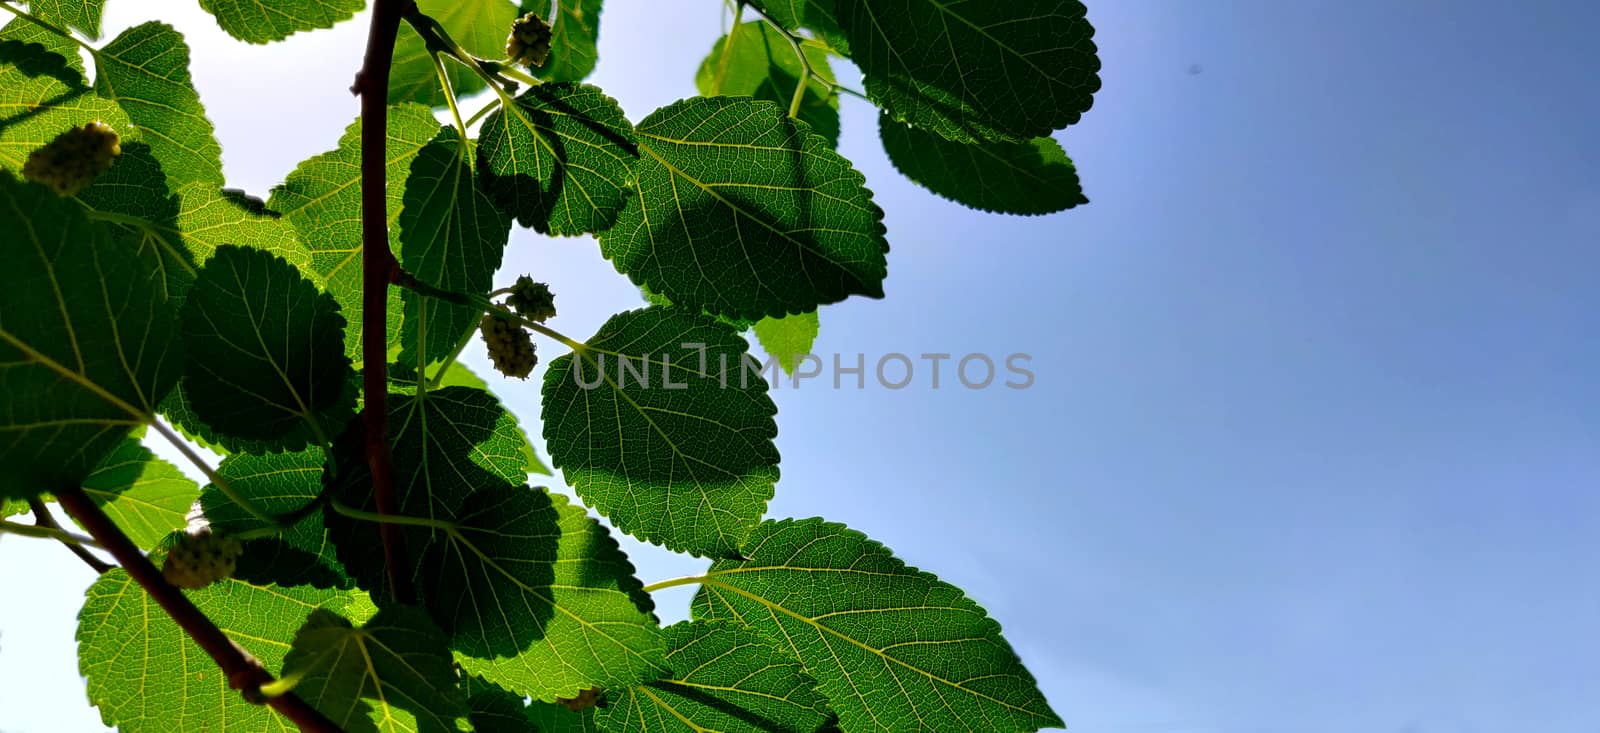 Background image of mulberry tree leaves against sun in afternoon